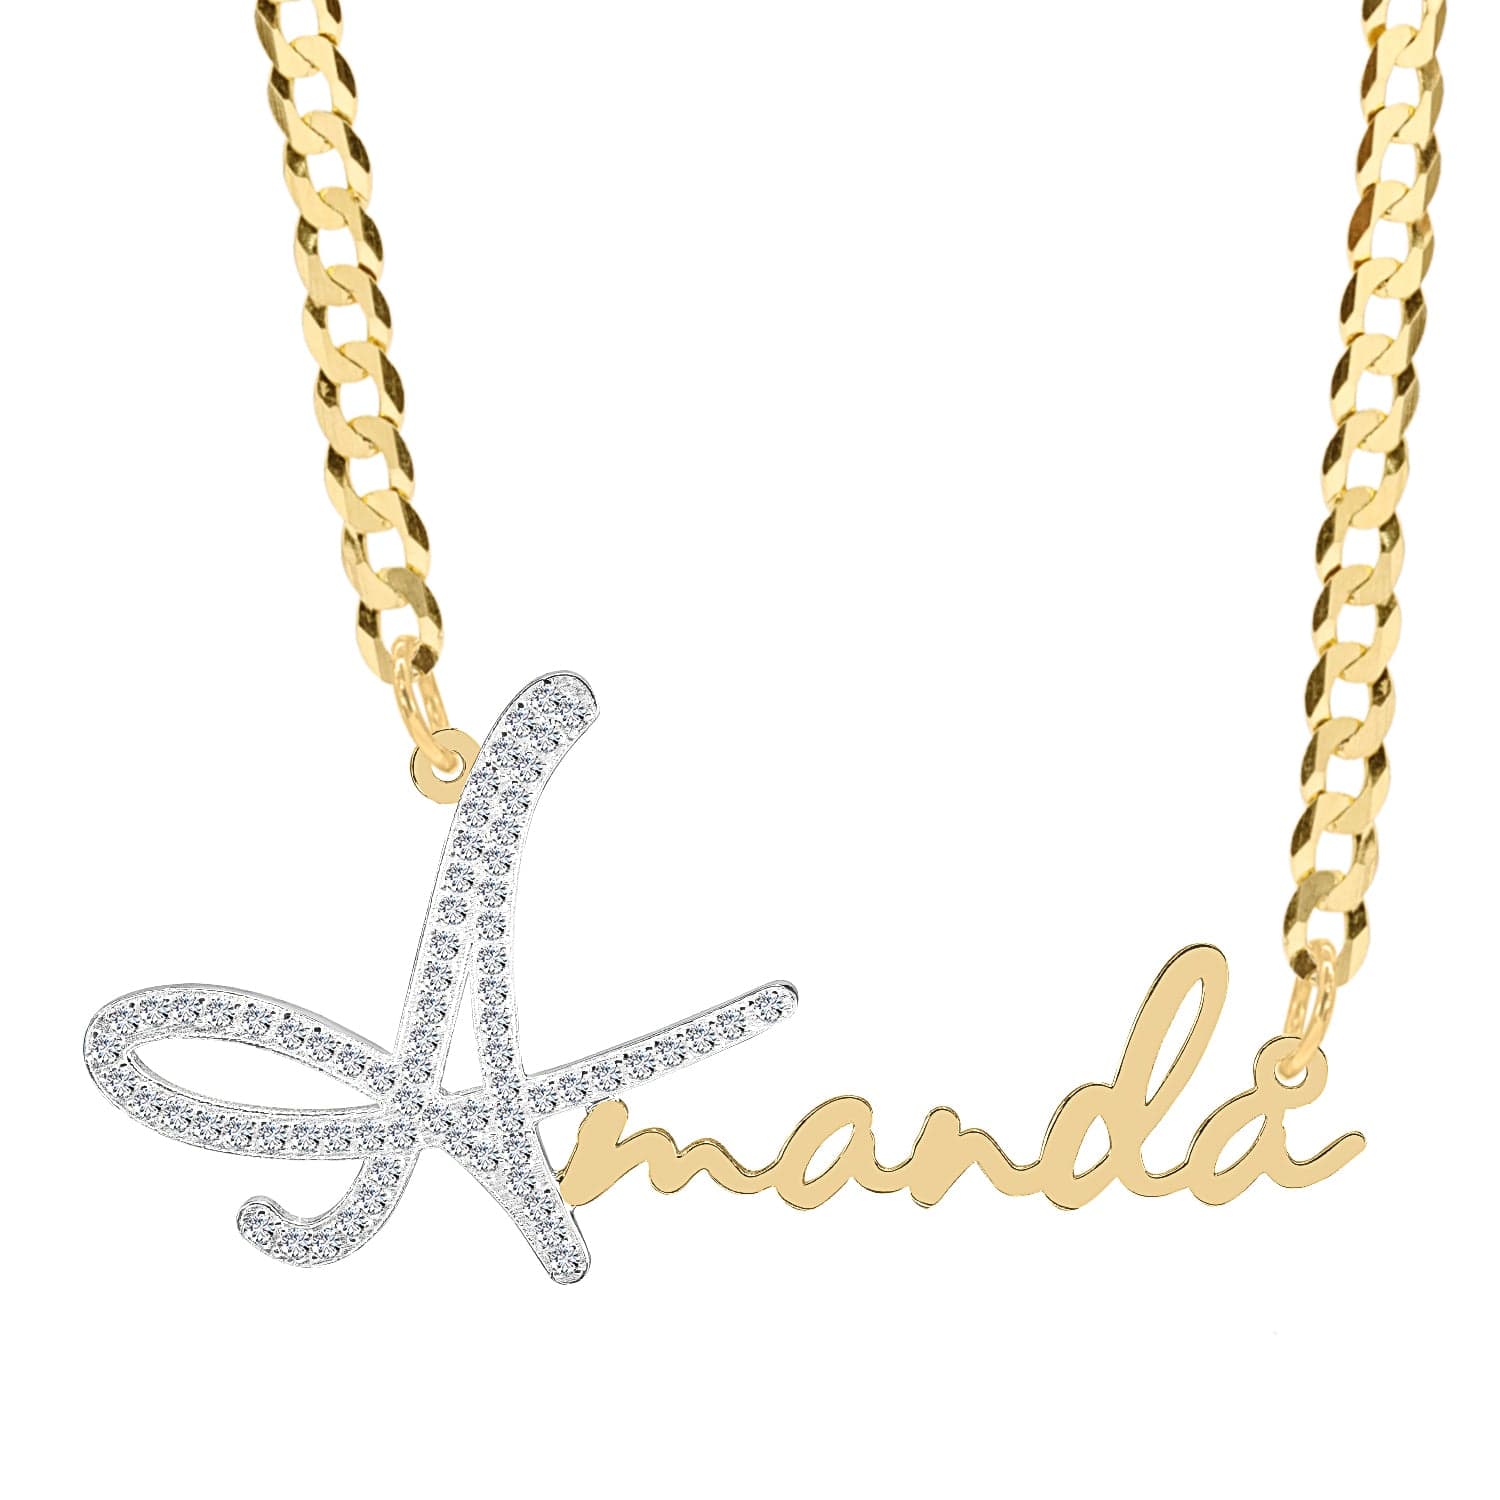 14k Gold over Sterling Silver / Link Chain Single Plated Nameplate Necklace "Amanda" with Stones